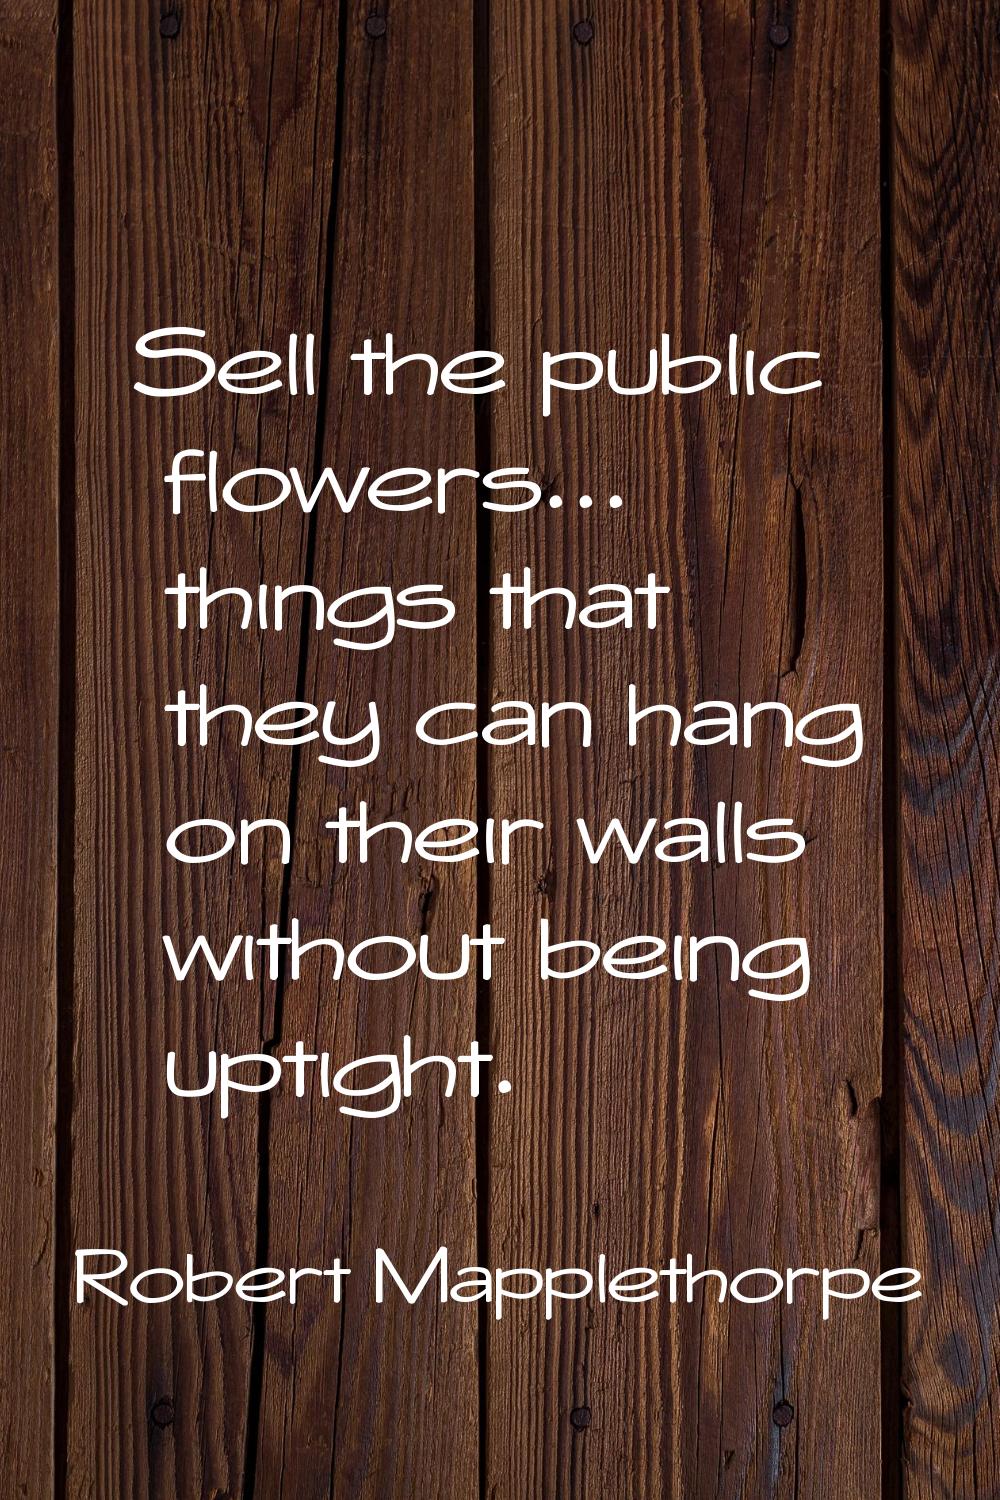 Sell the public flowers... things that they can hang on their walls without being uptight.